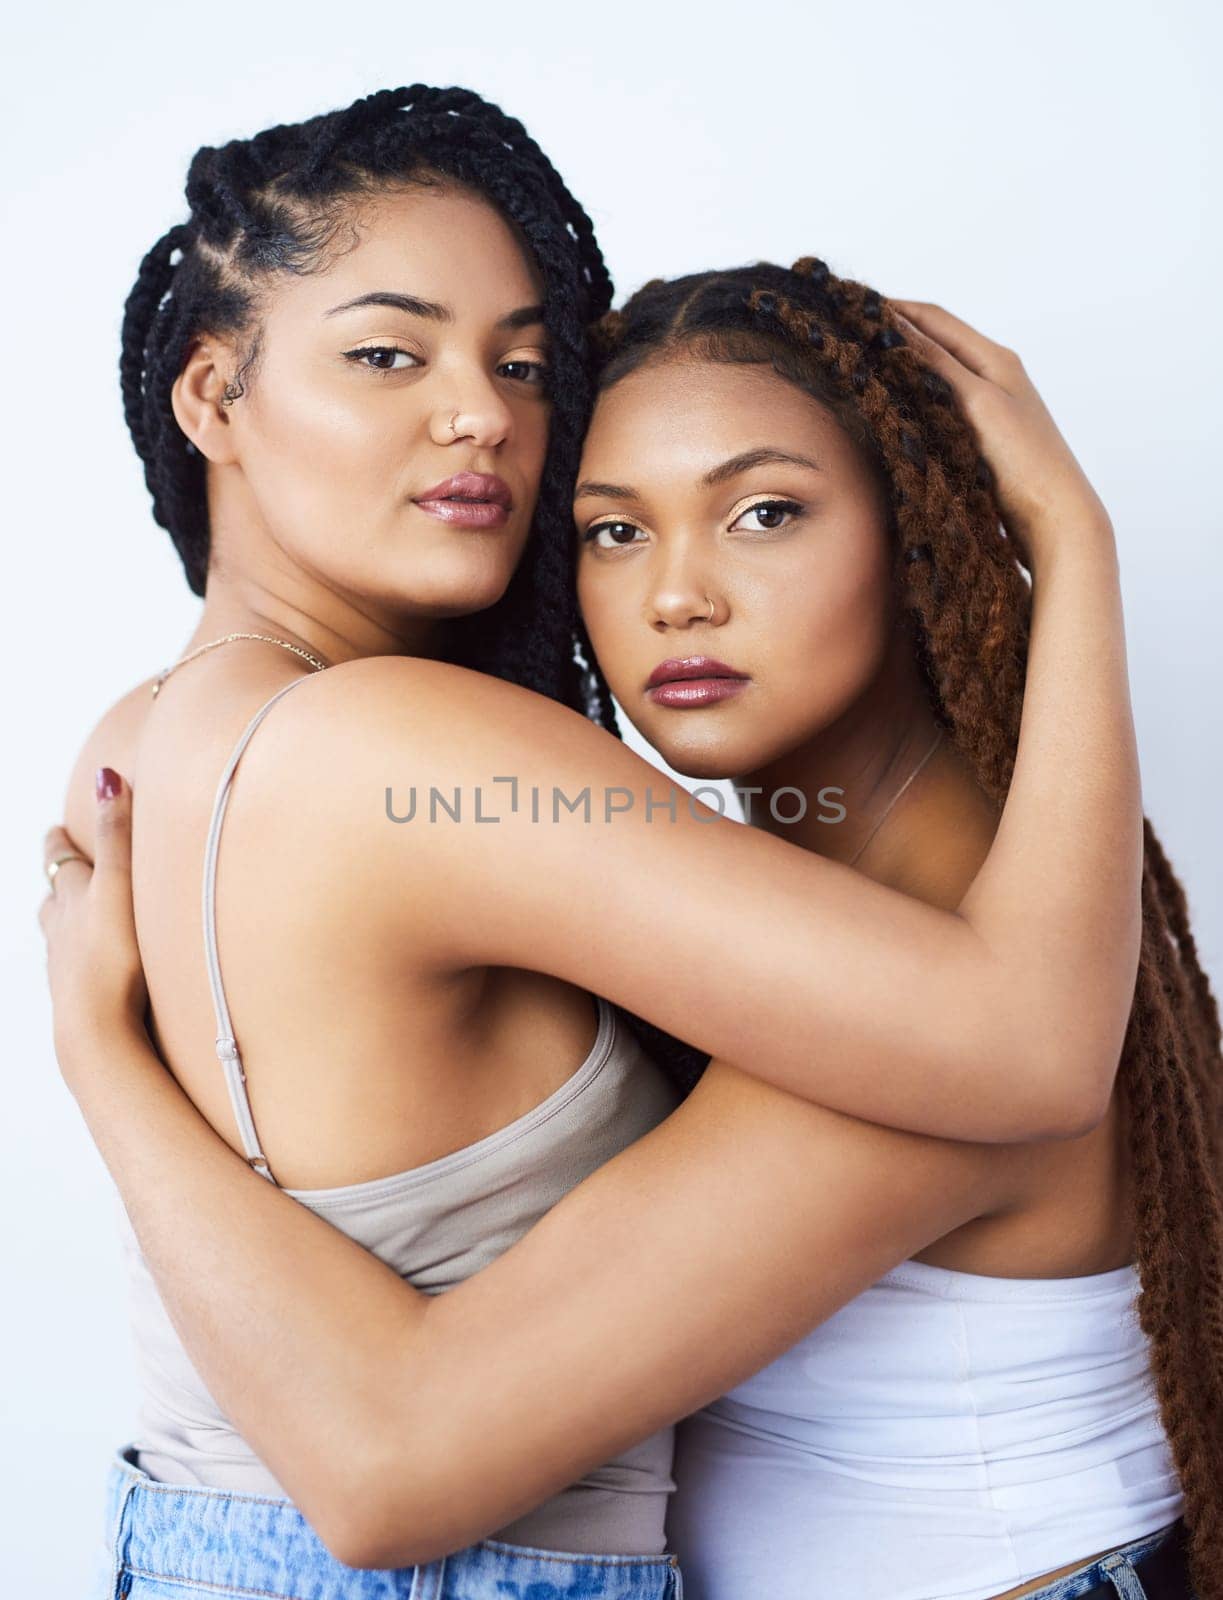 Sisters, portrait and style in studio, hug and aesthetic bonding on white background. Women, friends and embrace for relationship on backdrop, casual outfit and fashion pride for trend or support.